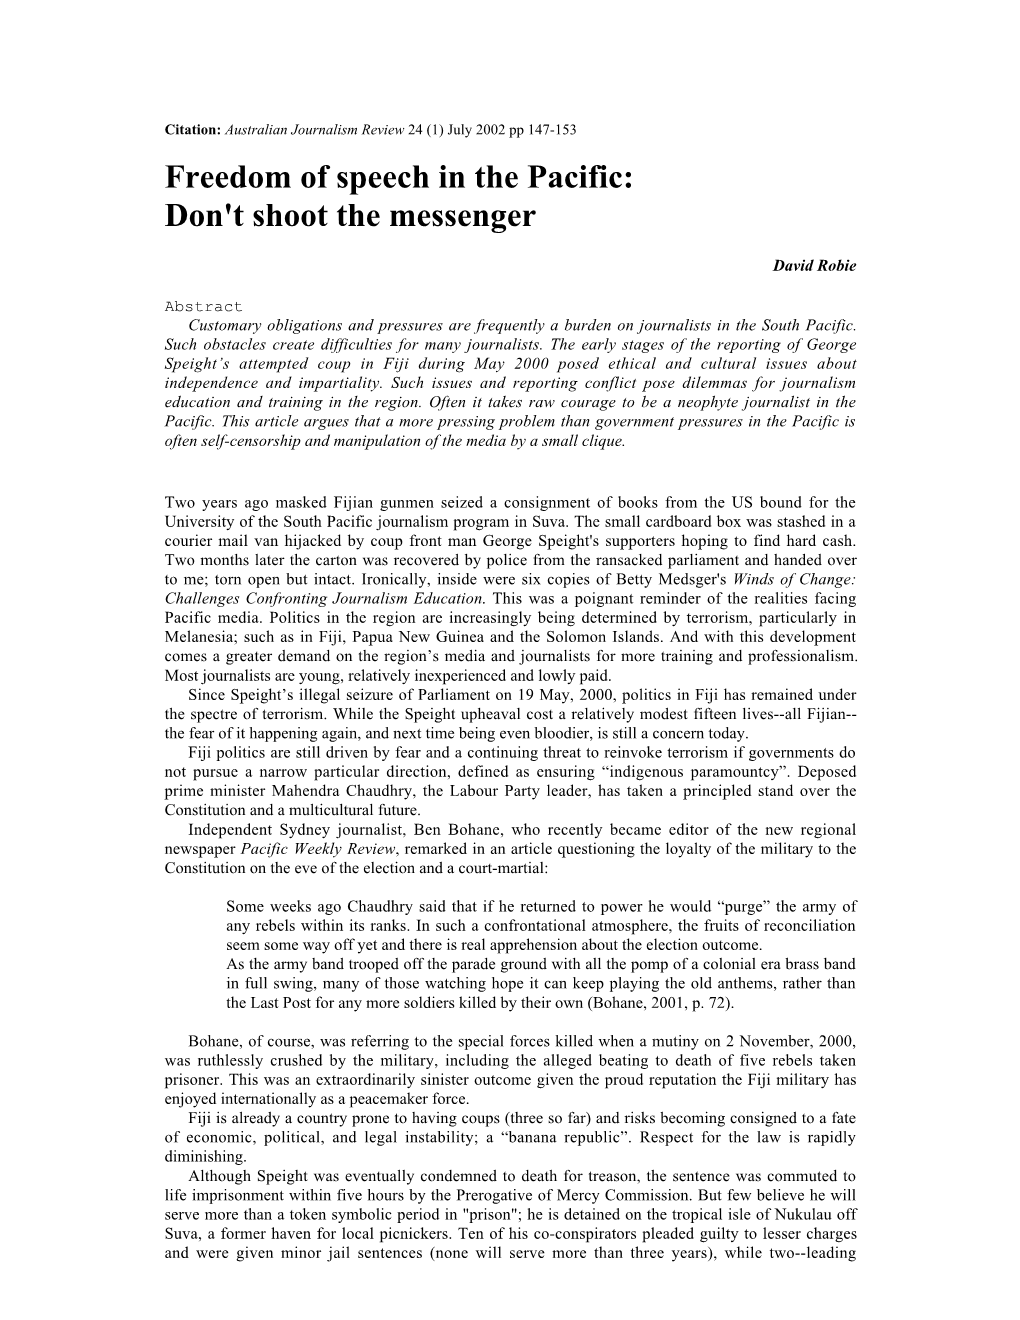 Freedom of Speech in the Pacific: Don't Shoot the Messenger